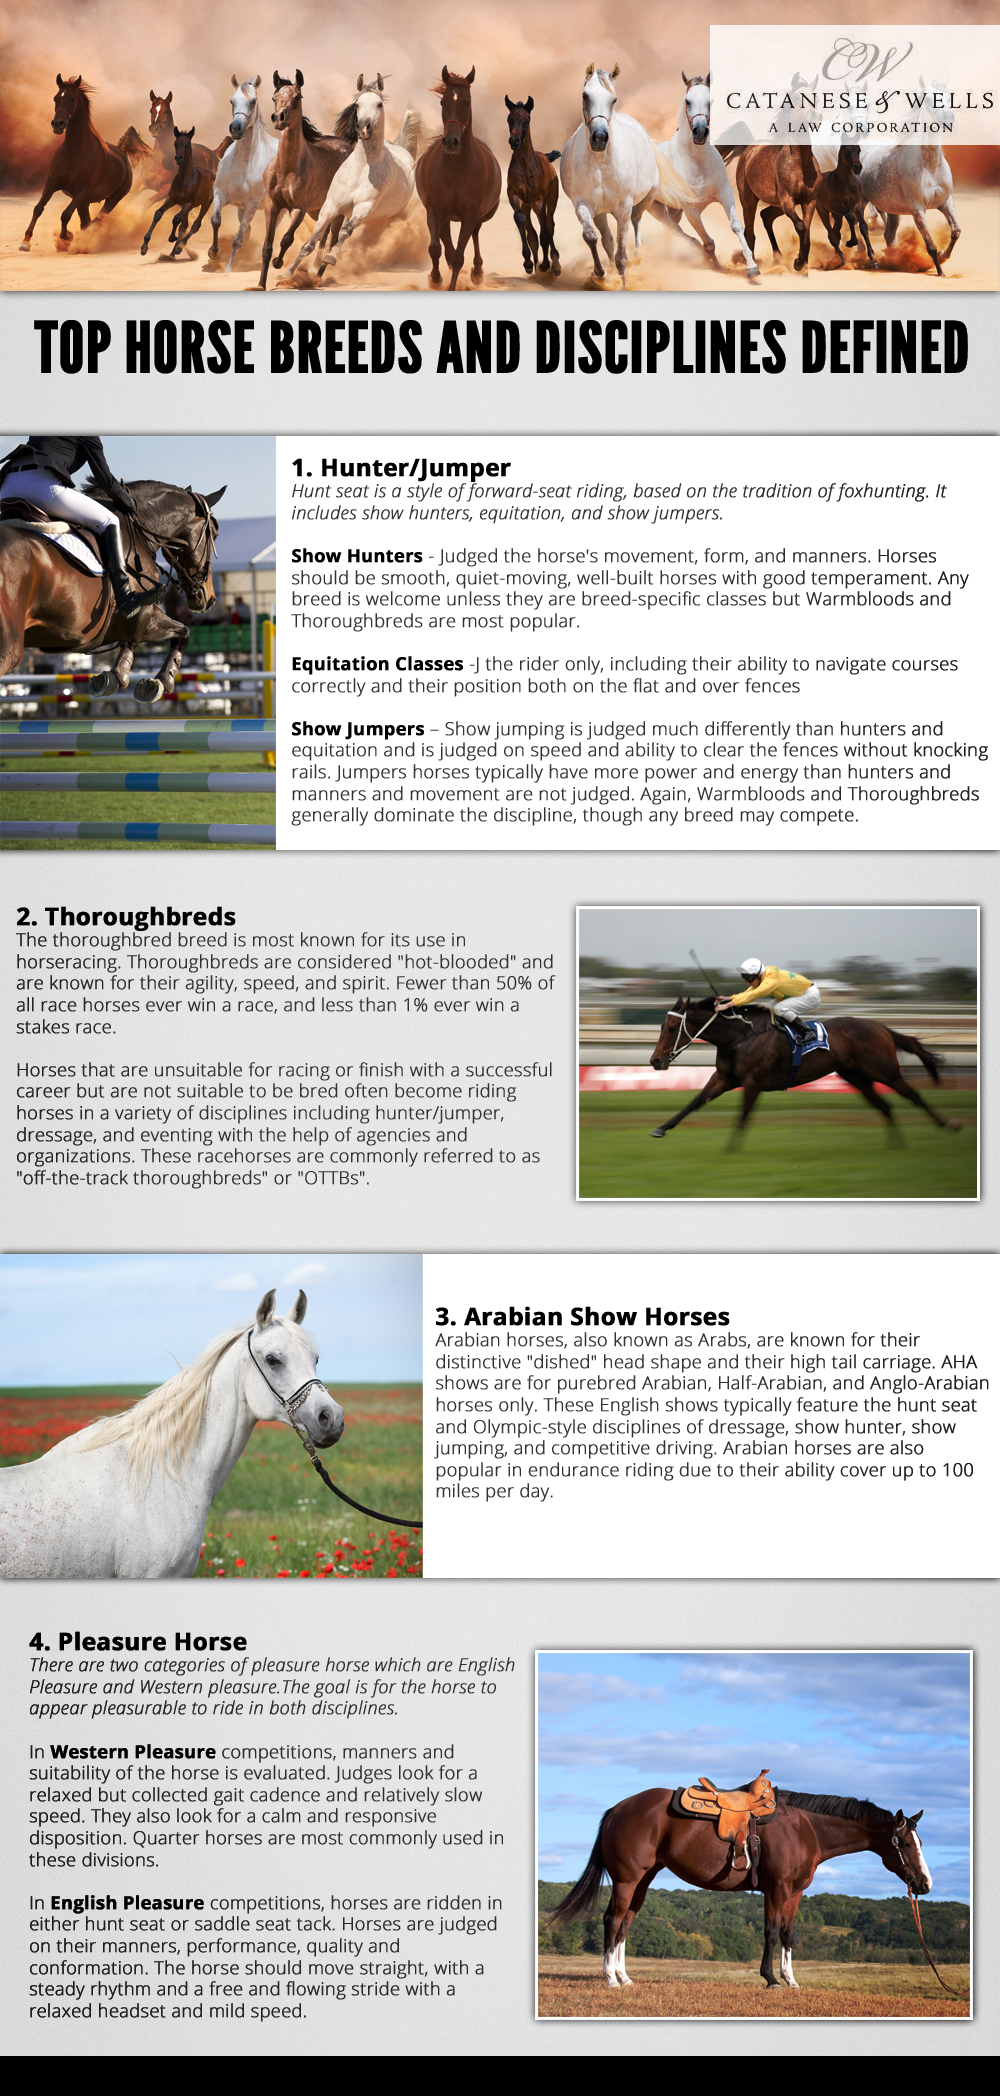 Top Horse and Disciplines Defined: An Infographic - Catanese & Wells